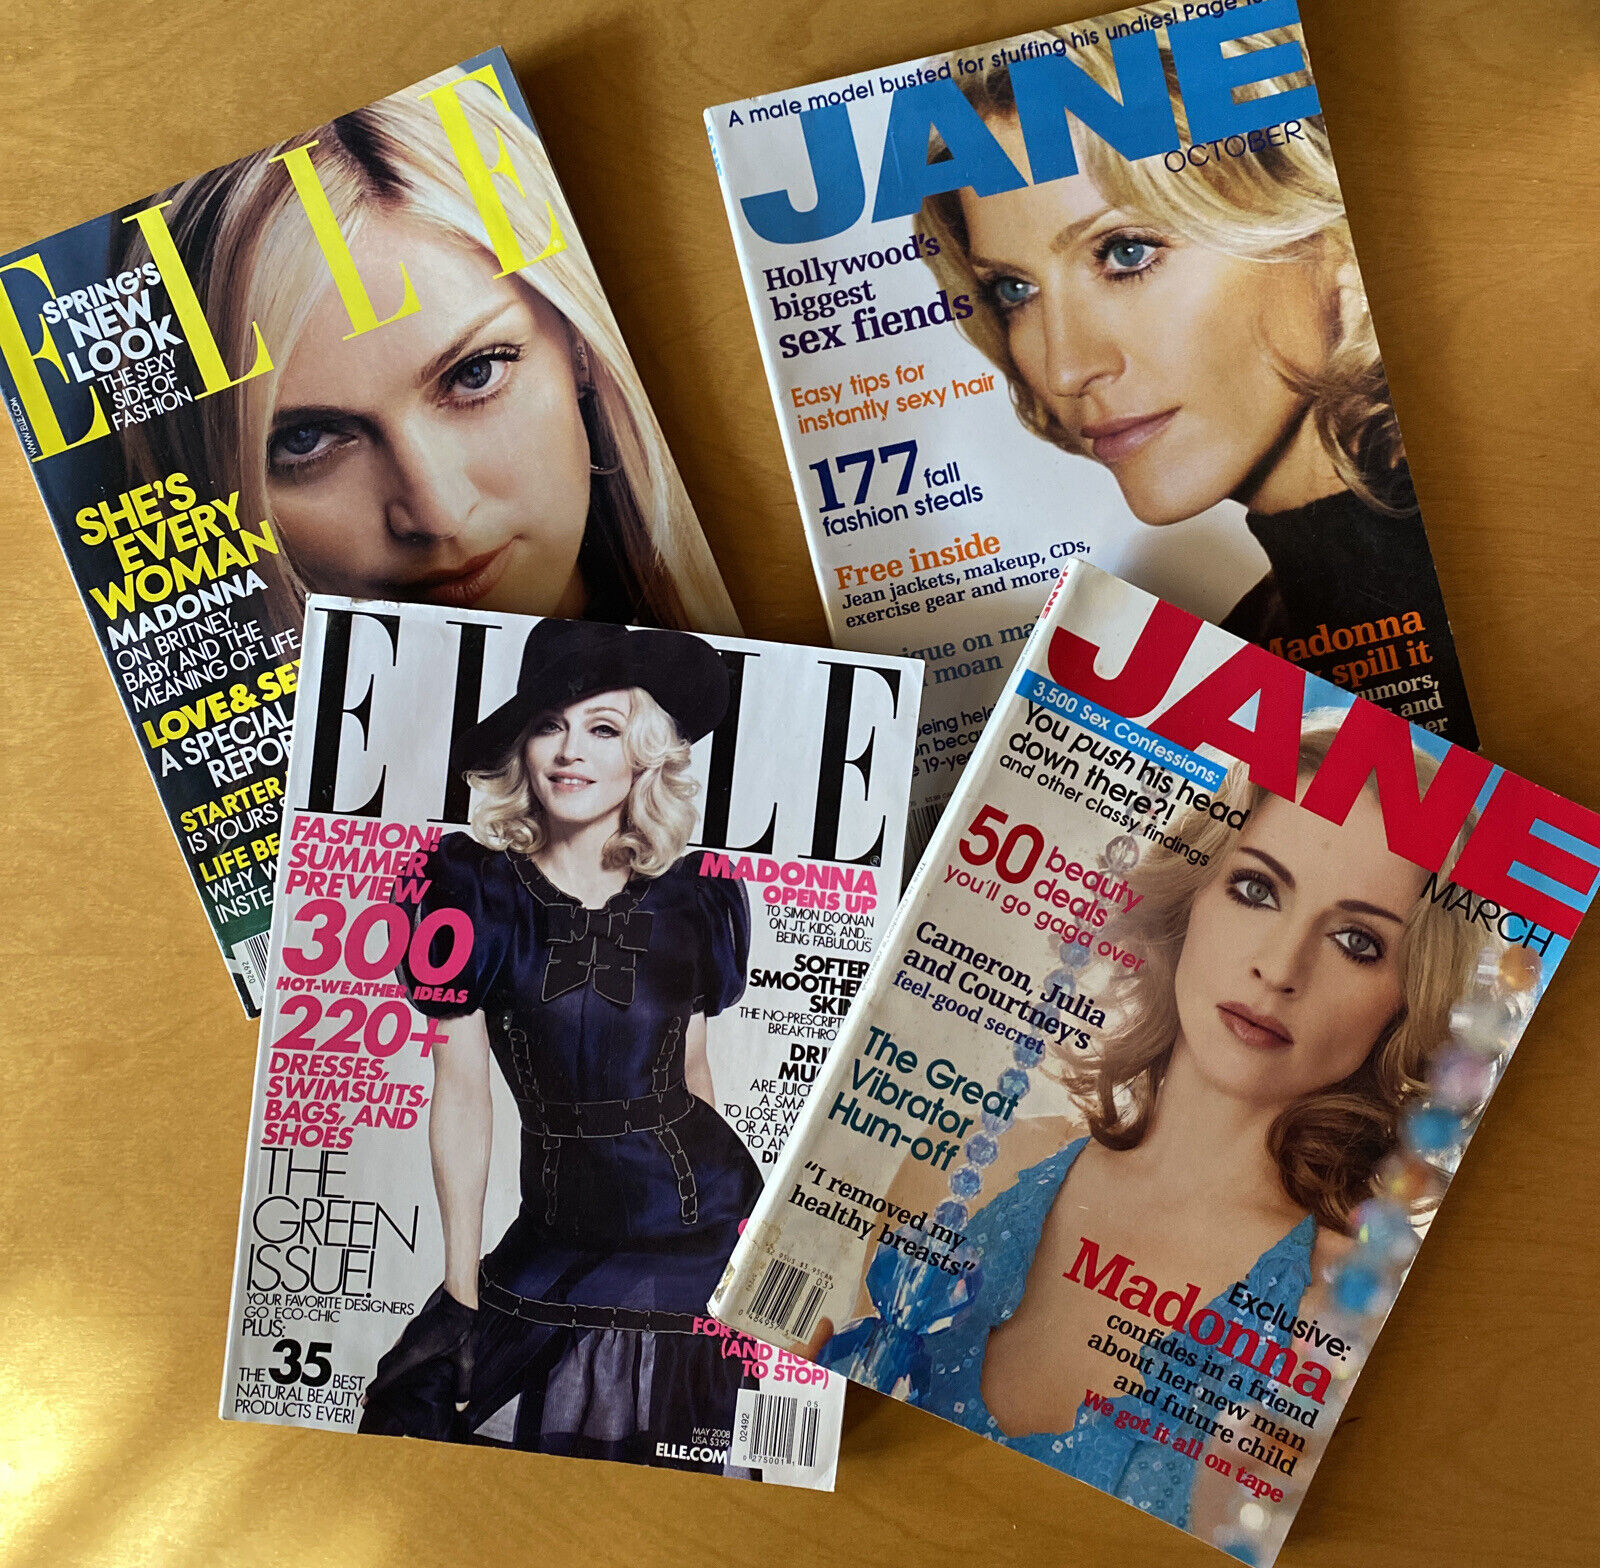 Four Madonna Magazines Jane March 2000 & October 2002 Elle May 2008 & Feb 2001